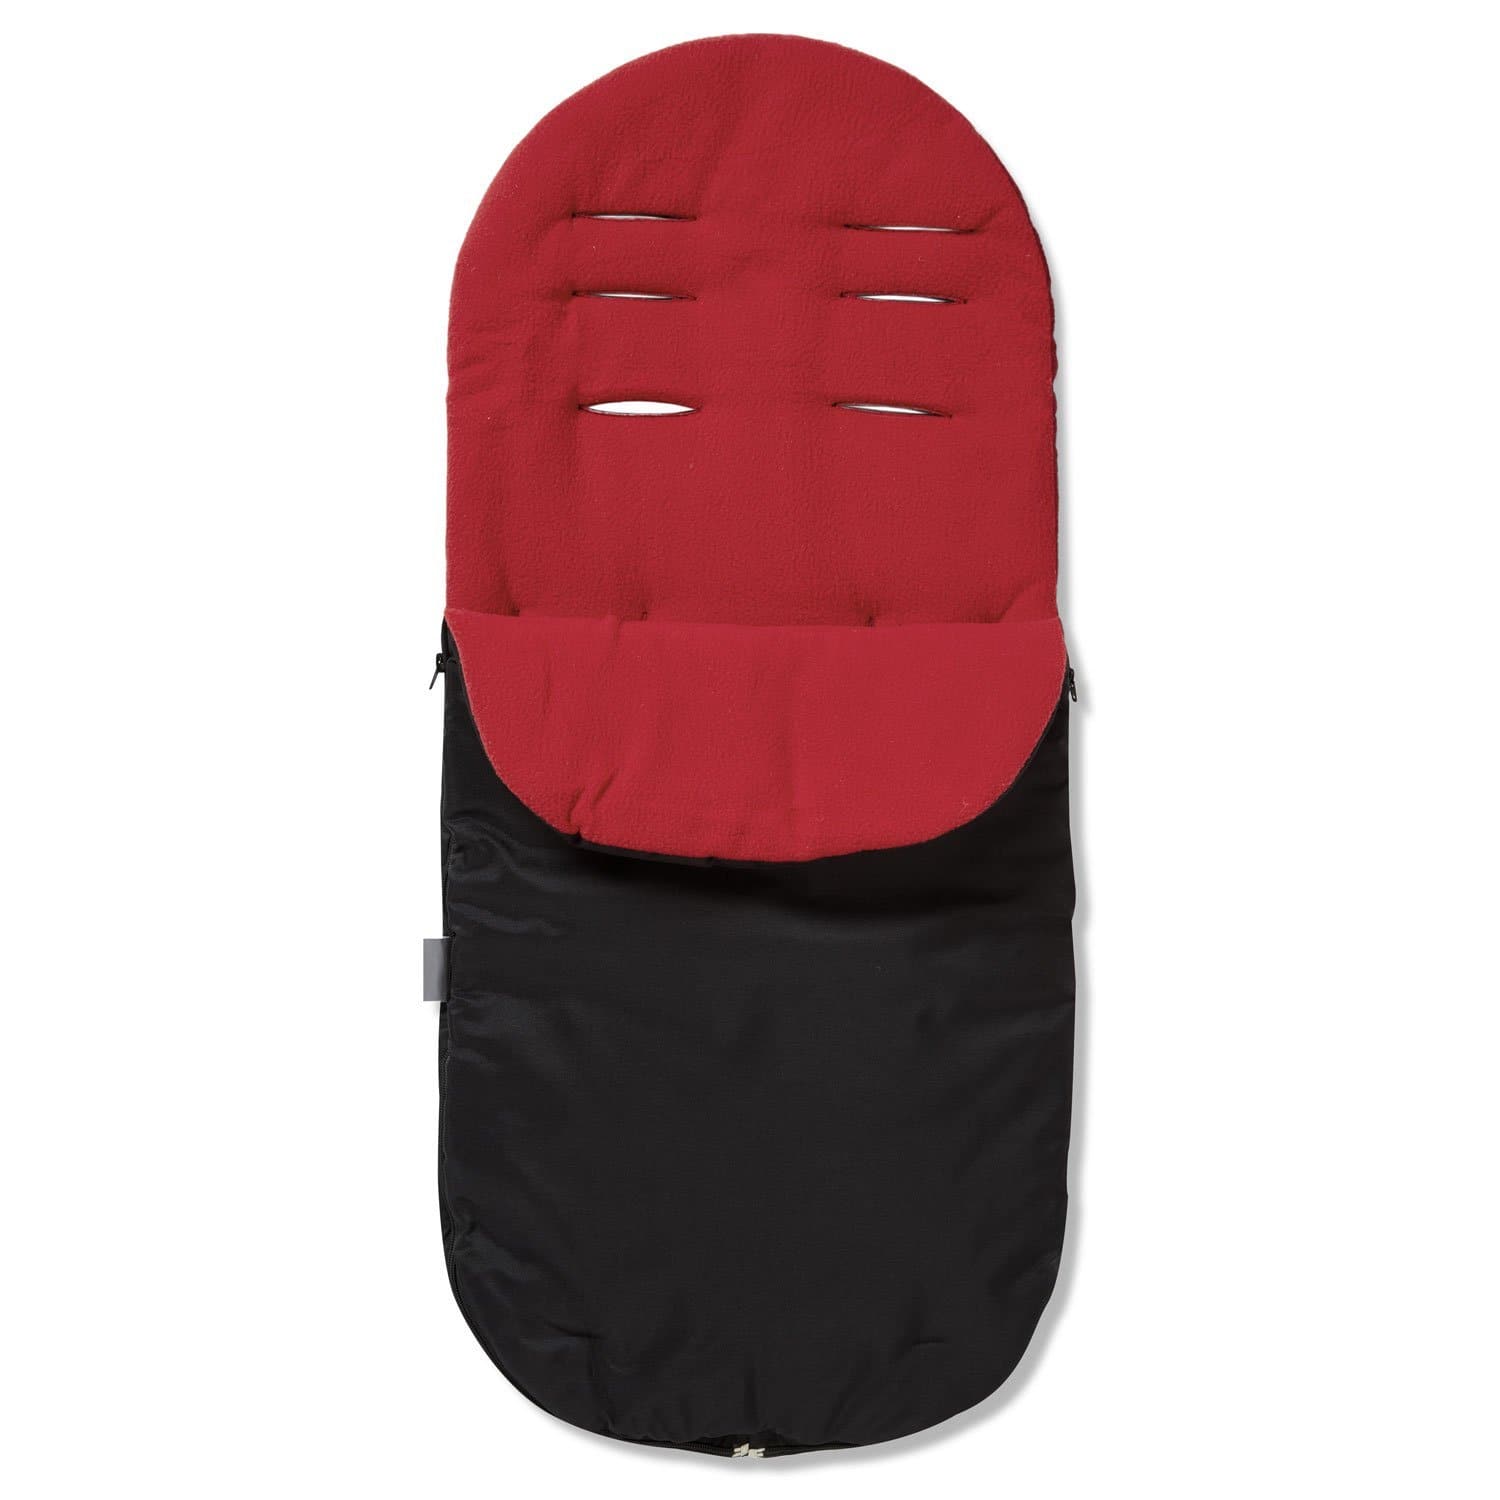 Footmuff / Cosy Toes Compatible with ABC Design - Red / Fits All Models | For Your Little One